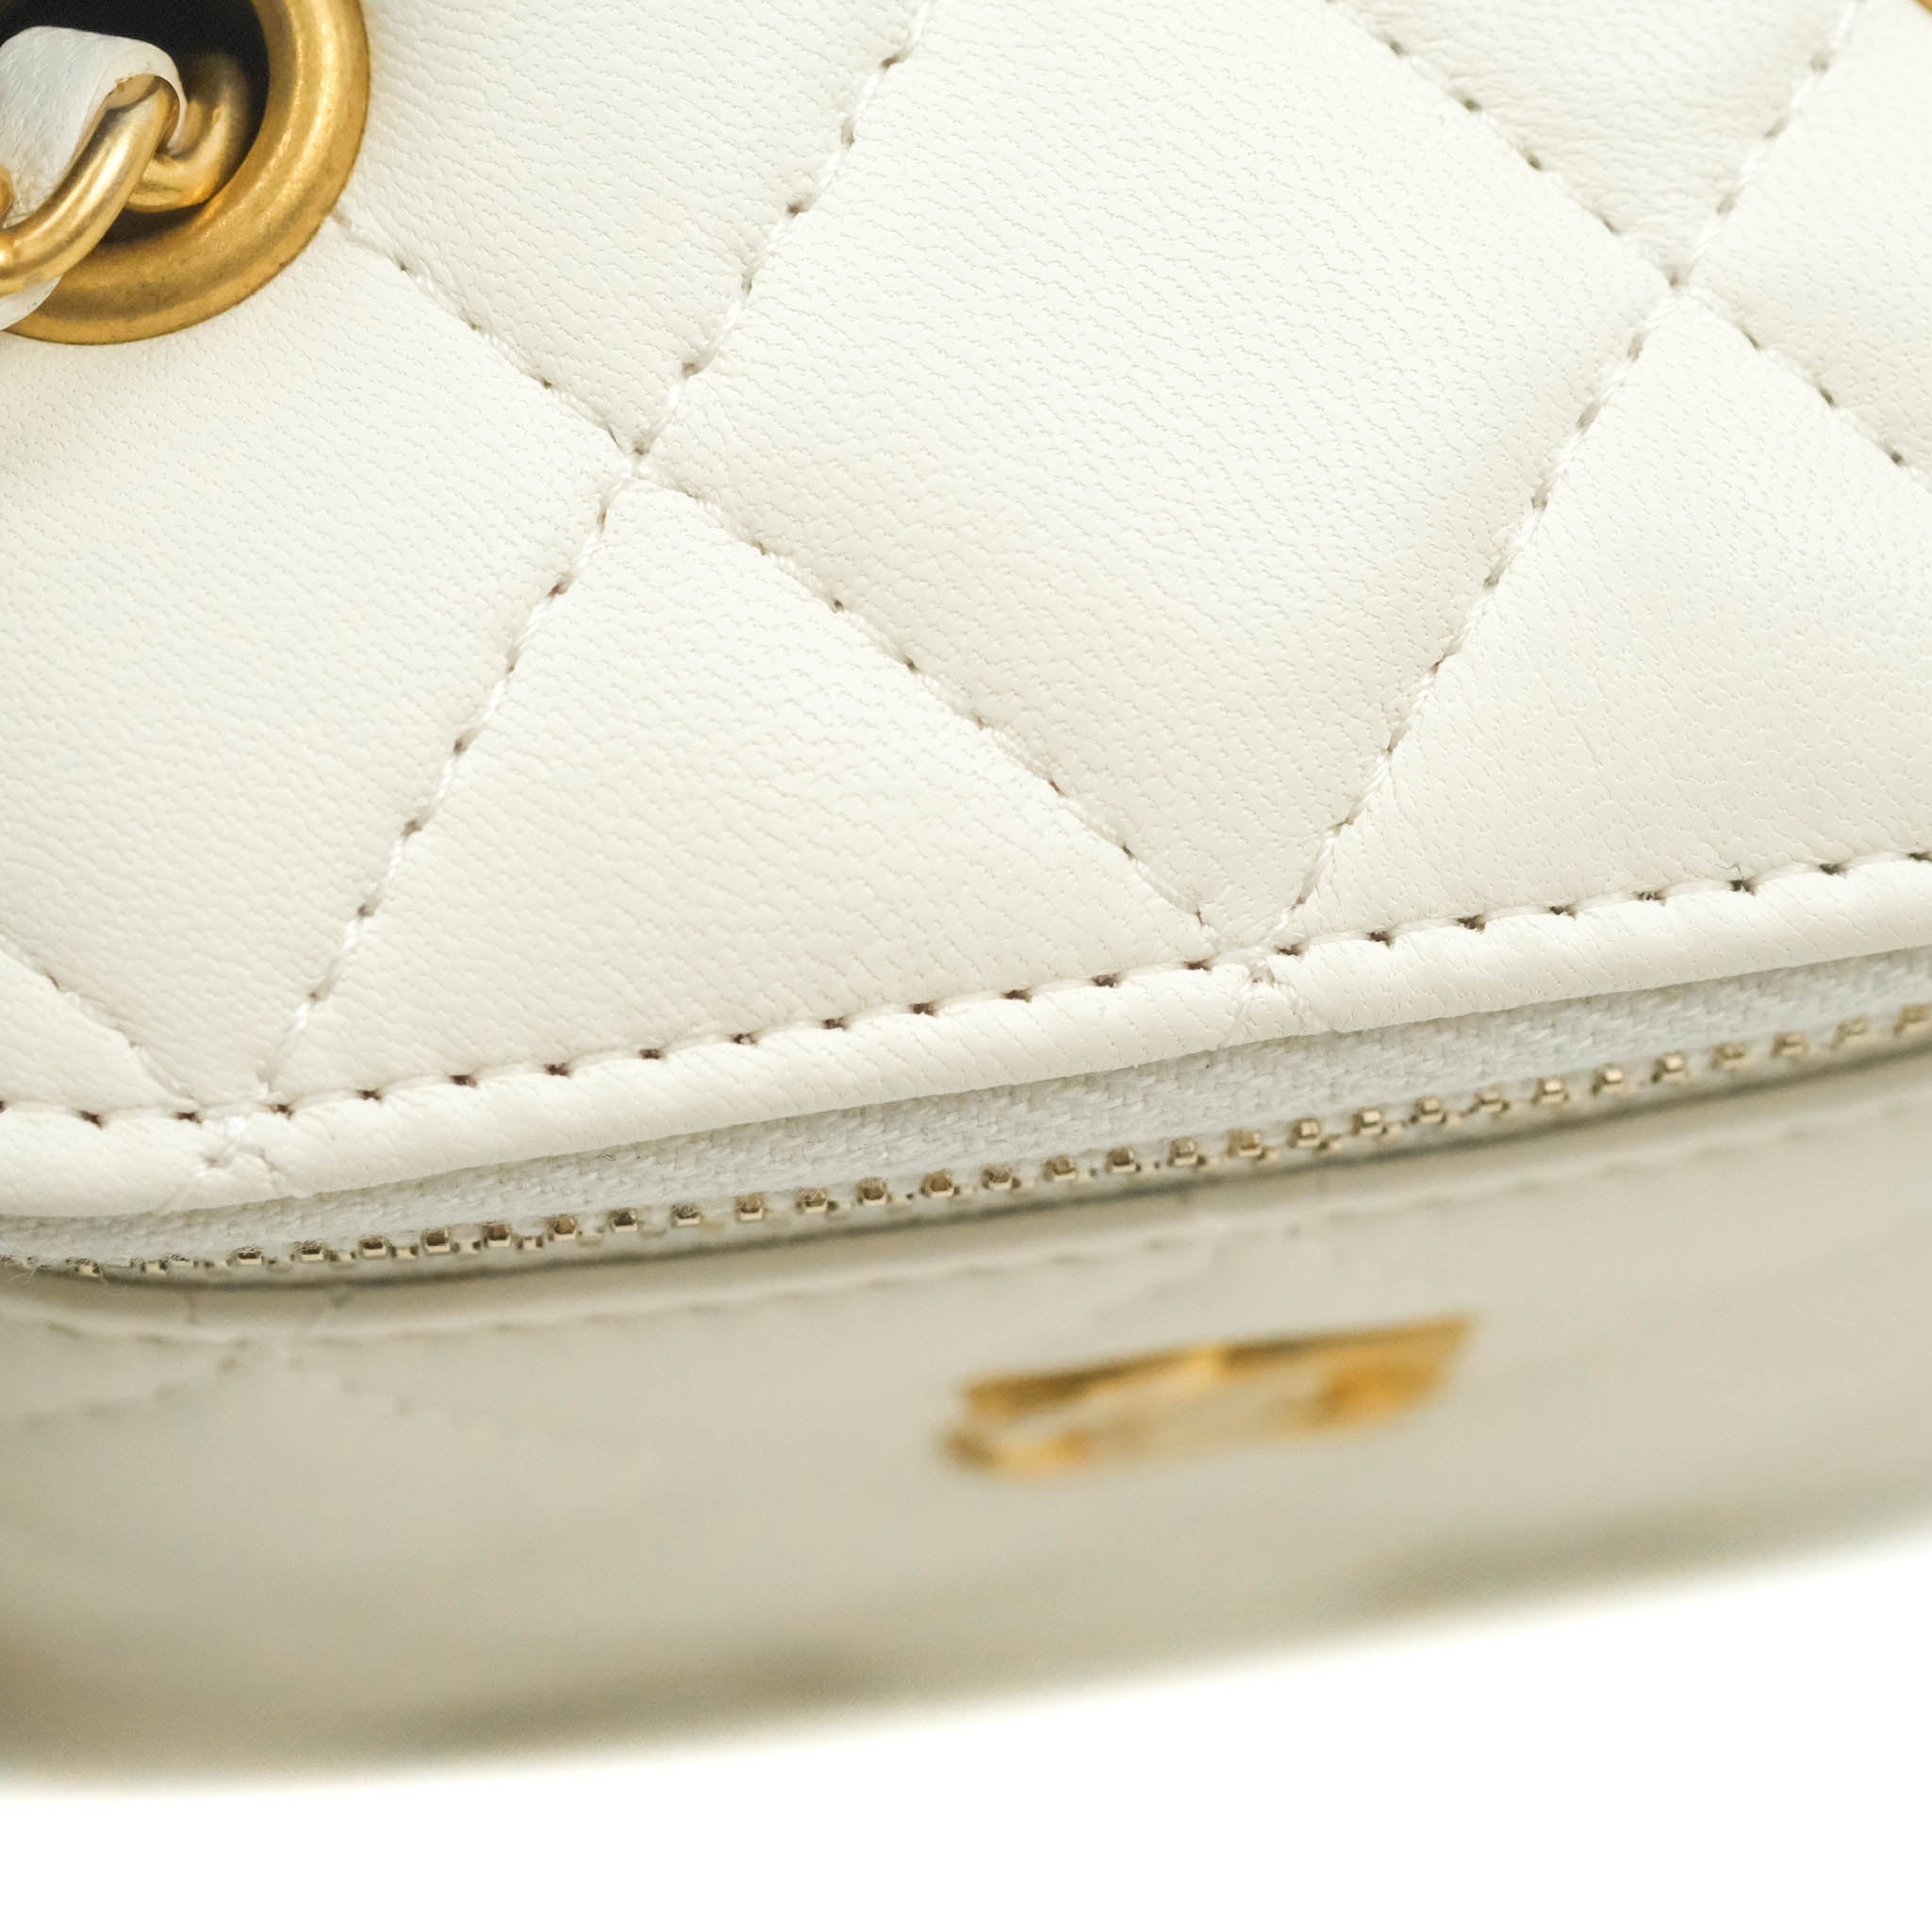 Chanel 2022 Coco Pearl Crush Vanity Case - ShopStyle Shoulder Bags